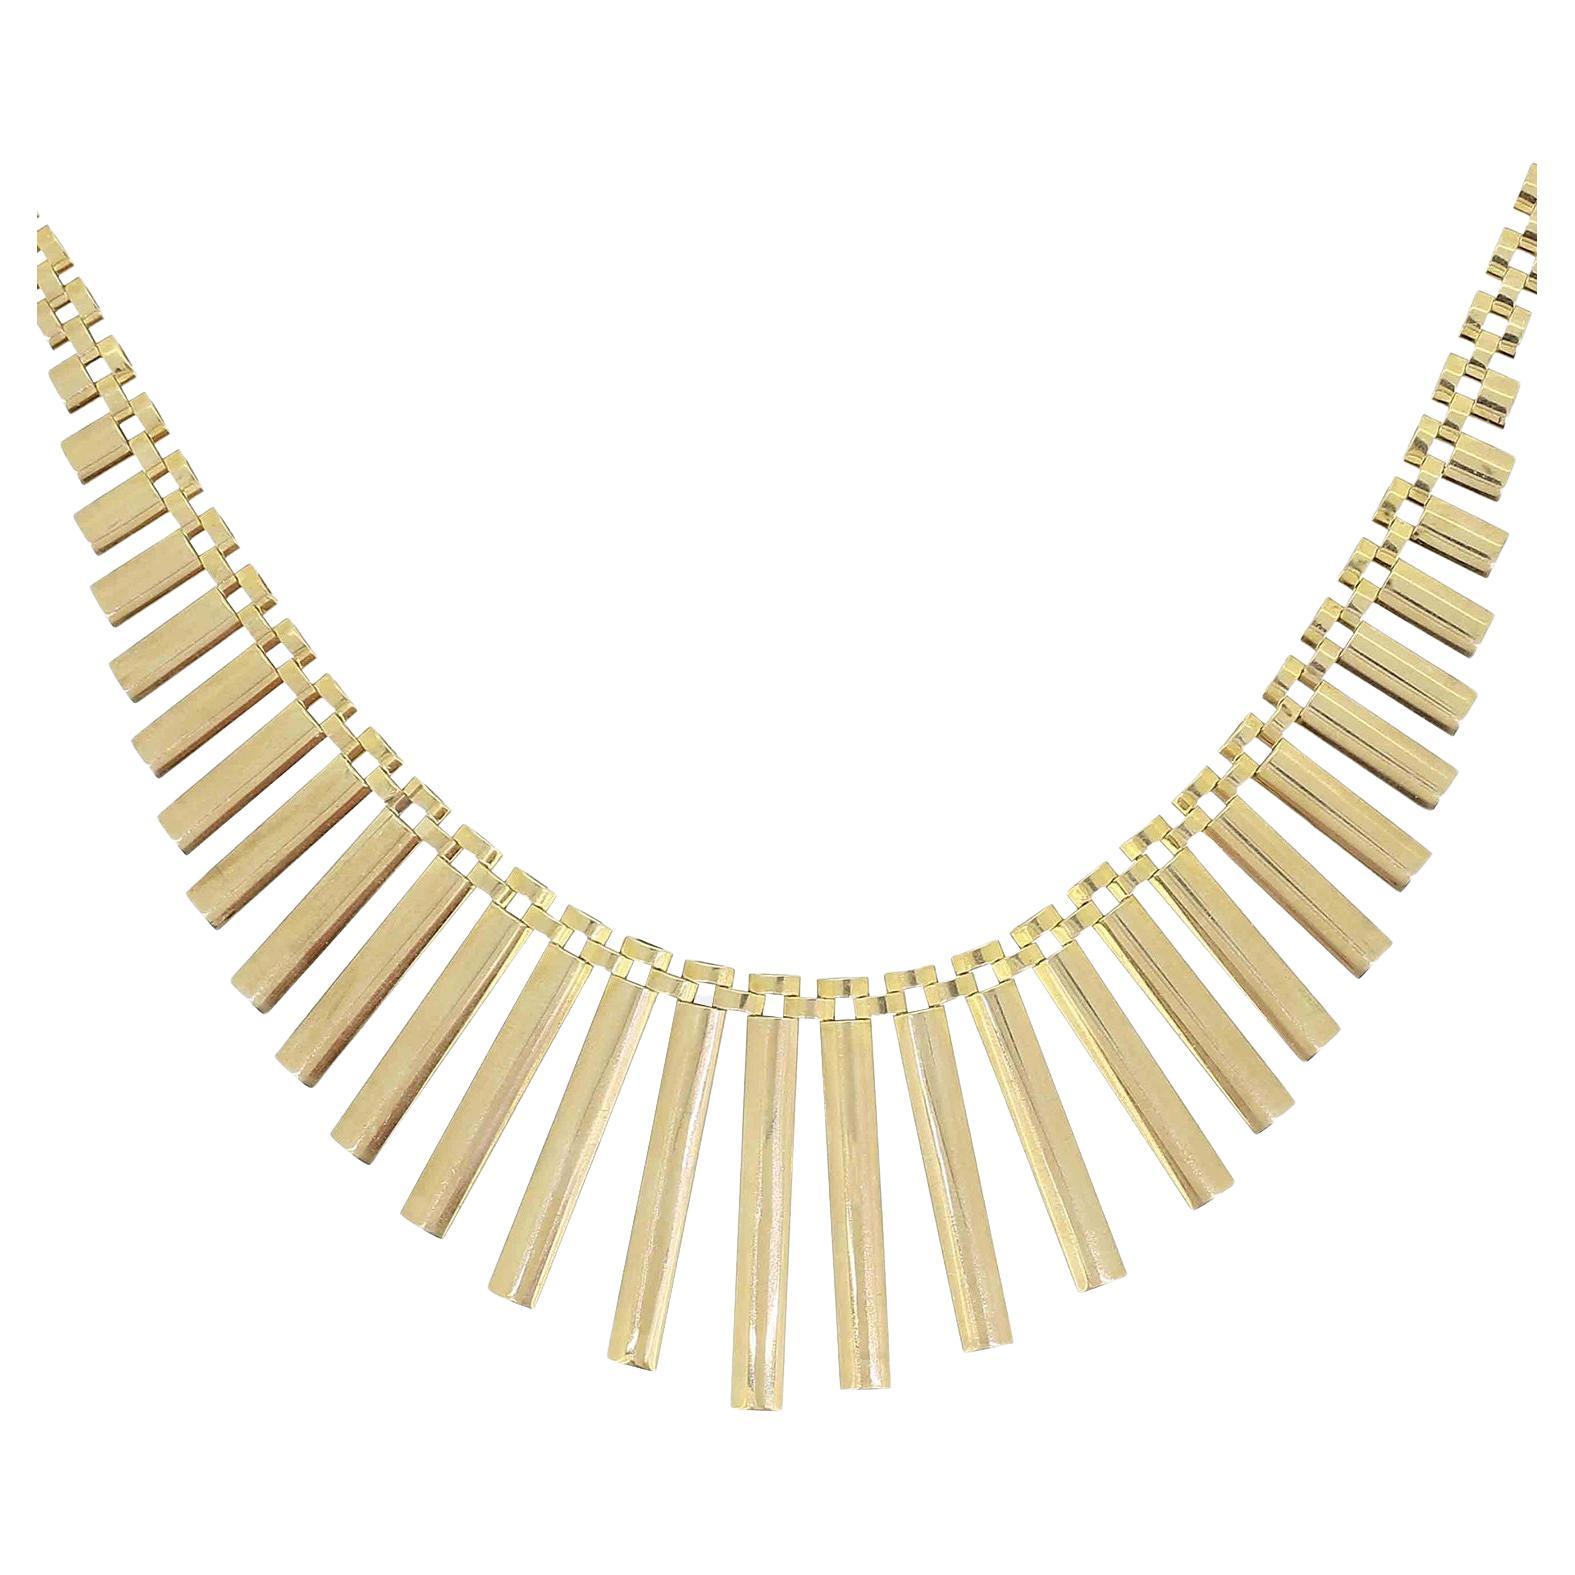 Cleopatra Necklace - Natalia Fedner Metal Couture